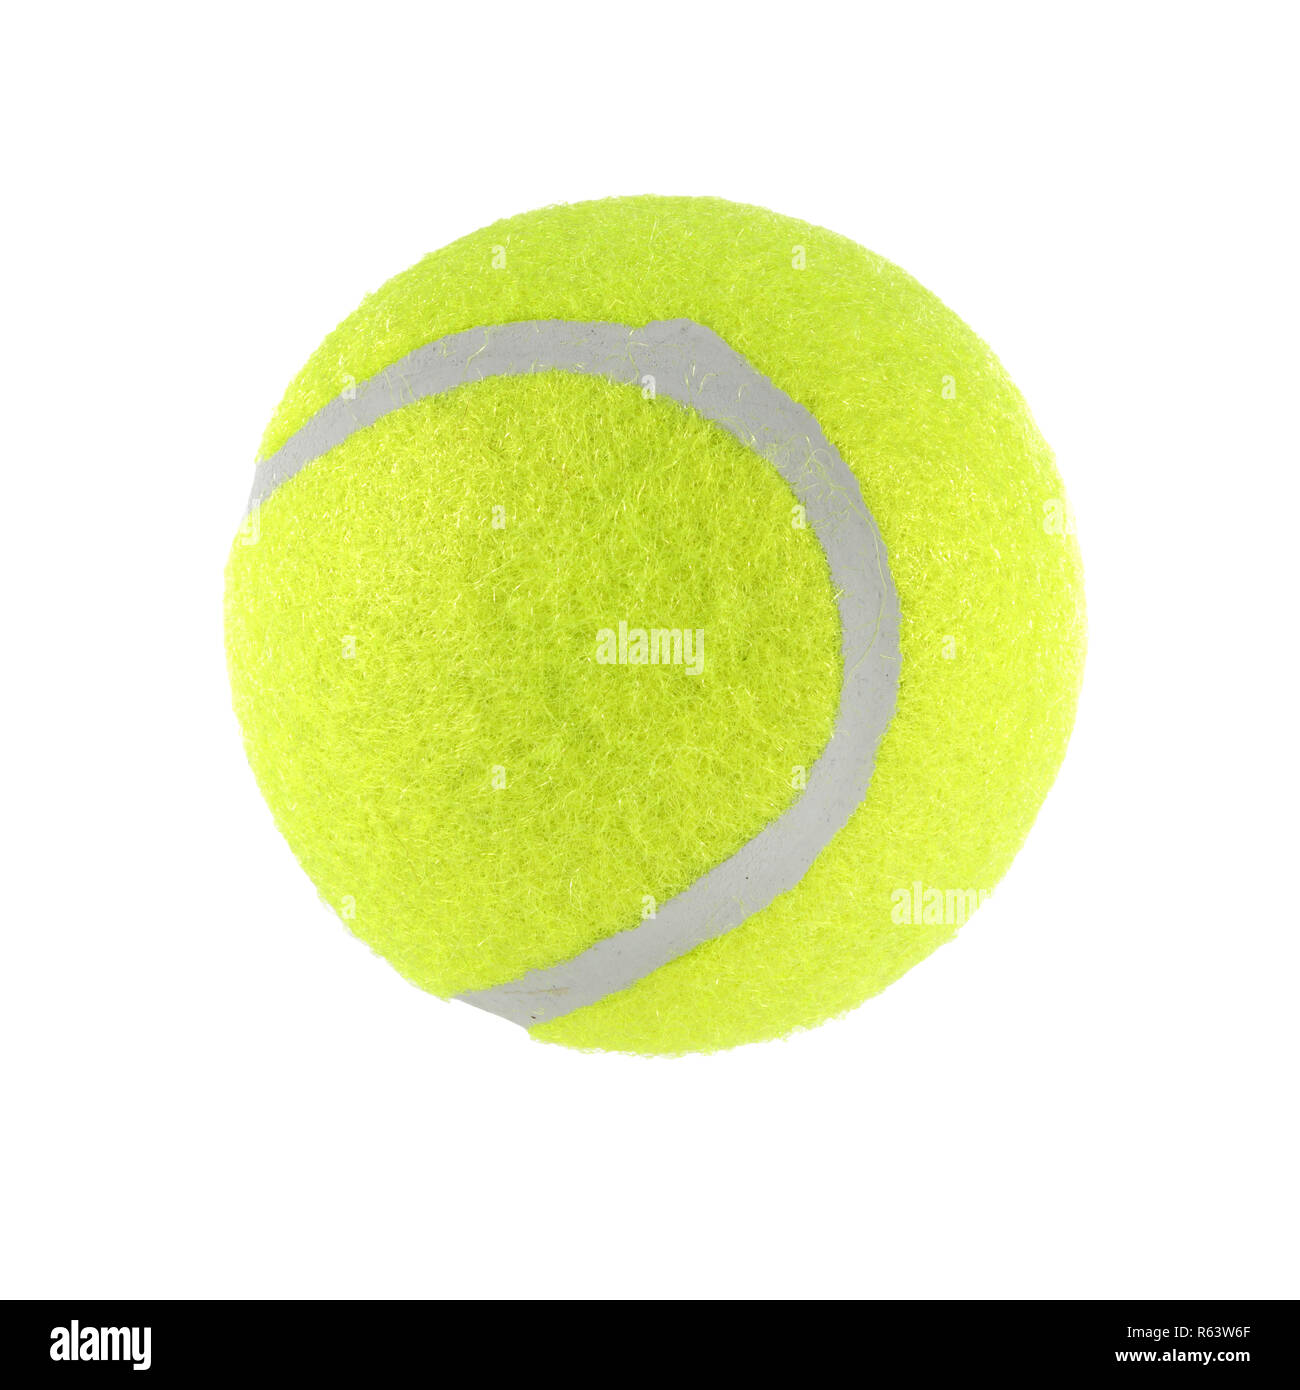 Tennis ball isolated on white background with clipping path Stock Photo